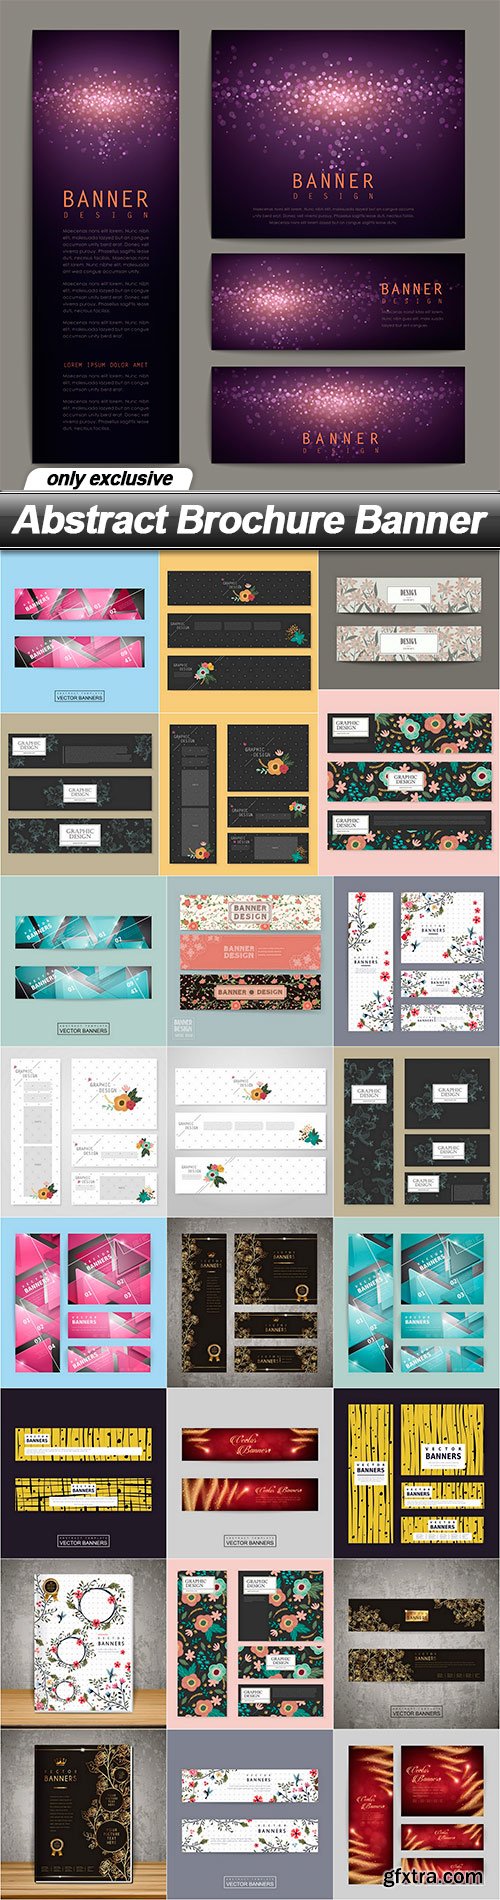 Abstract Brochure Banner - 25 EPS